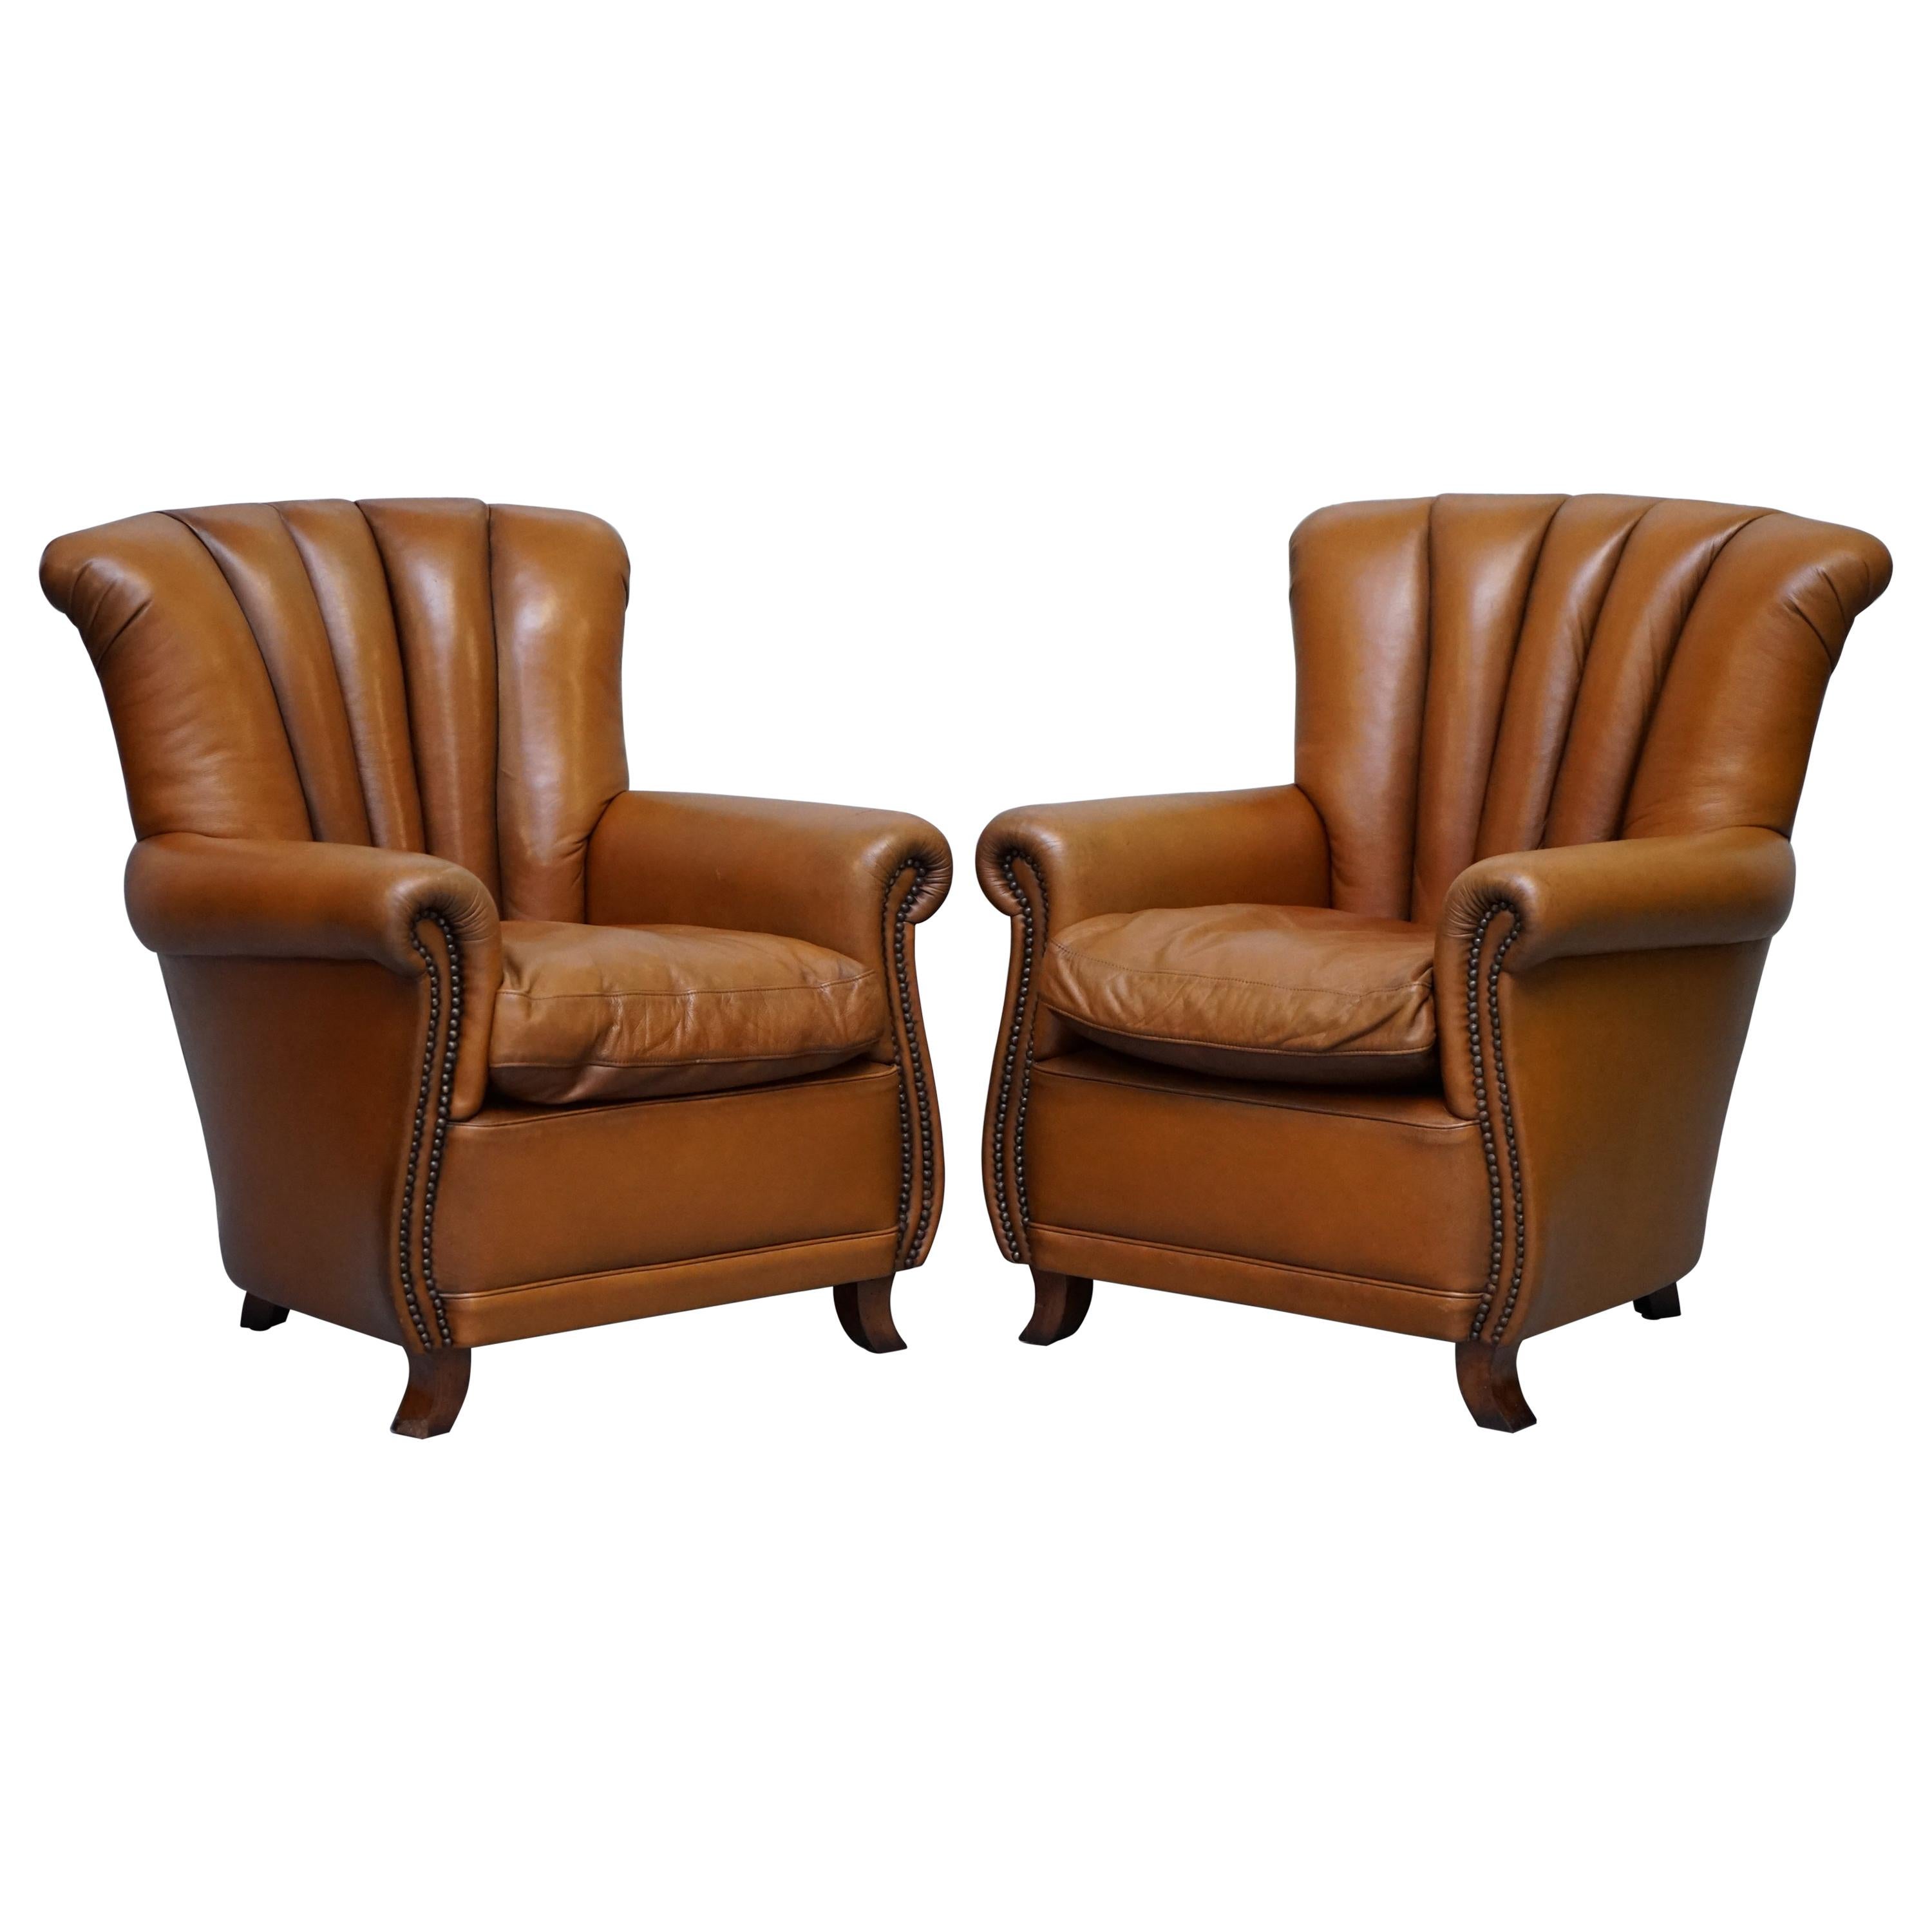 Lovely Pair of Tan Brown Leather Tetra Ella Armchairs with Art Deco Fluted Backs